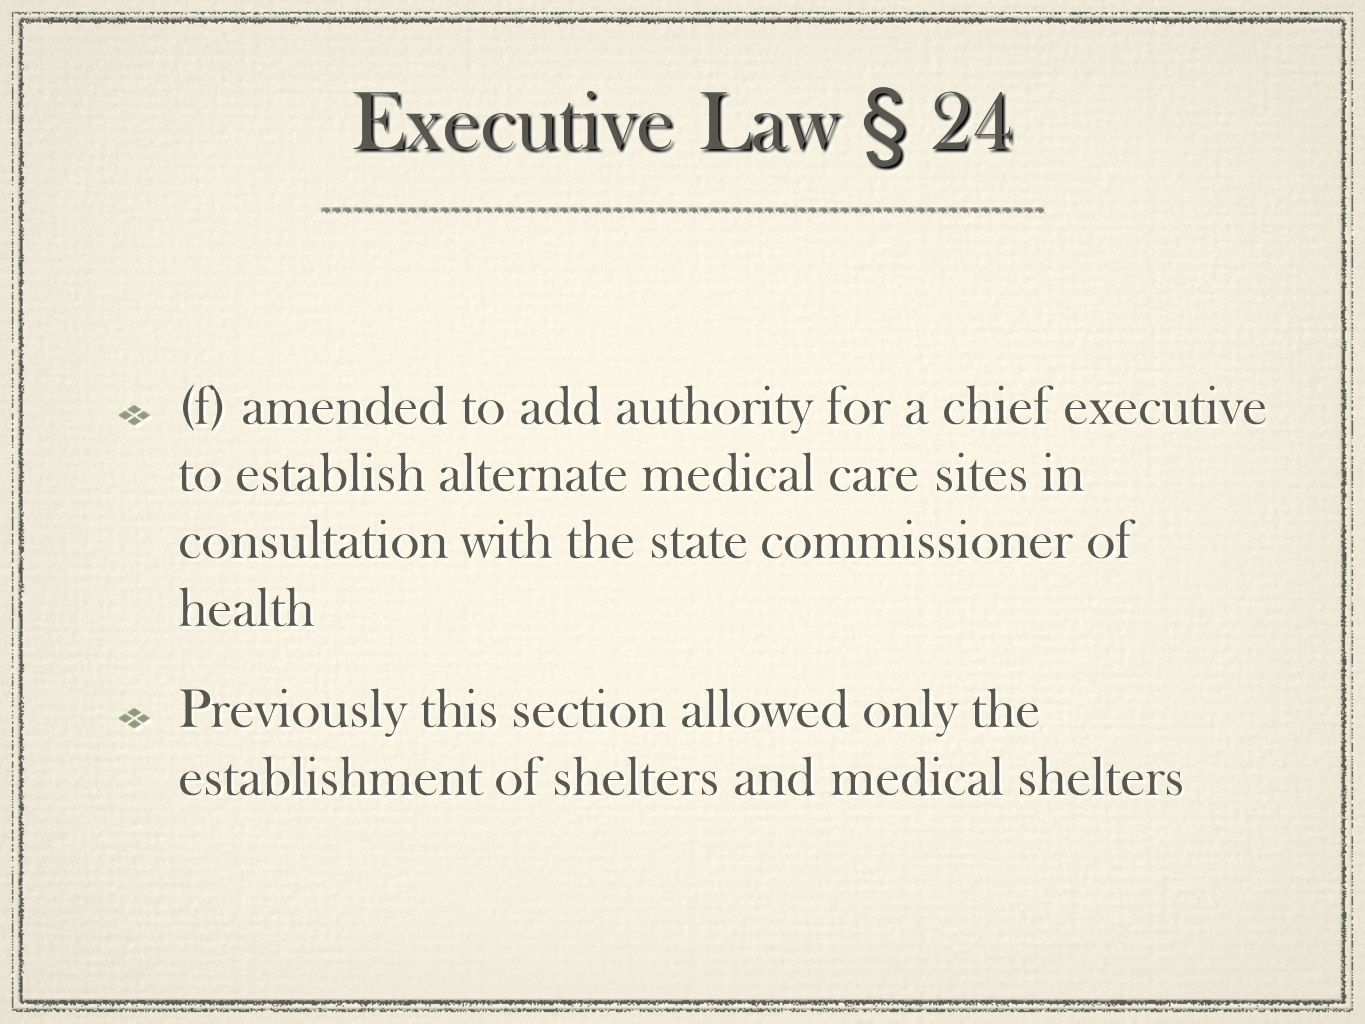 Executive Law § 24 (f) amended to add authority for a chief executive to establish alternate medical care sites in consultation with the state commissioner of health Previously this section allowed only the establishment of shelters and medical shelters (f) amended to add authority for a chief executive to establish alternate medical care sites in consultation with the state commissioner of health Previously this section allowed only the establishment of shelters and medical shelters